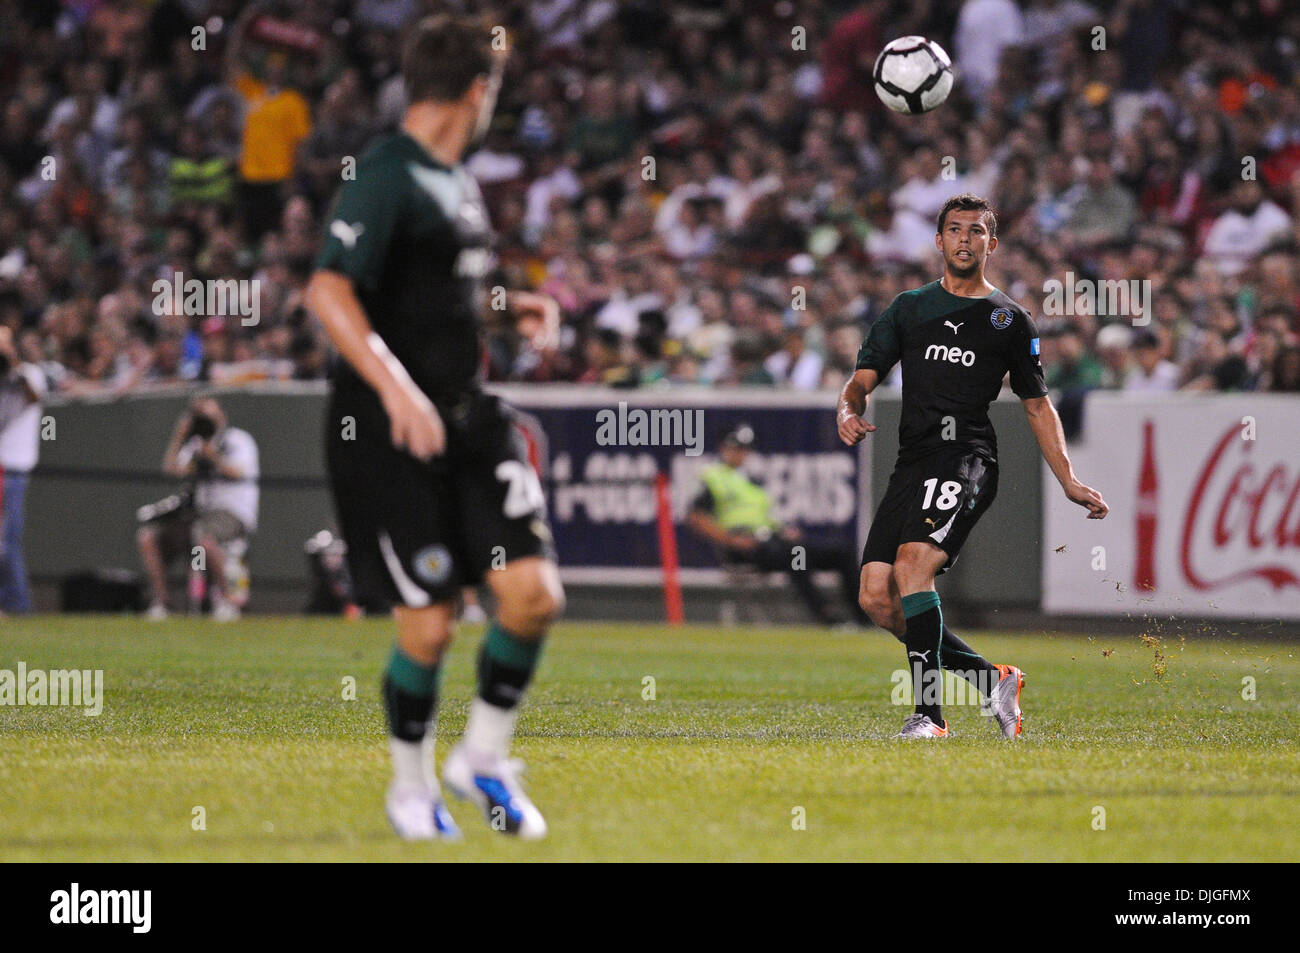 July 21, 2010 - Boston, Massachusetts, United States of America - 21 July 2010: Sporting defender Leandro Grimi (18) passes the ball to midfielder Miguel Veloso (24, foreground). Celtic FC defeated Sporting 6 - 5 in penalty kicks, with a final 1 - 1 score during an international friendly at Fenway Park, Boston, Massachusetts to win the first Fenway Football Challenge..Mandatory Cre Stock Photo